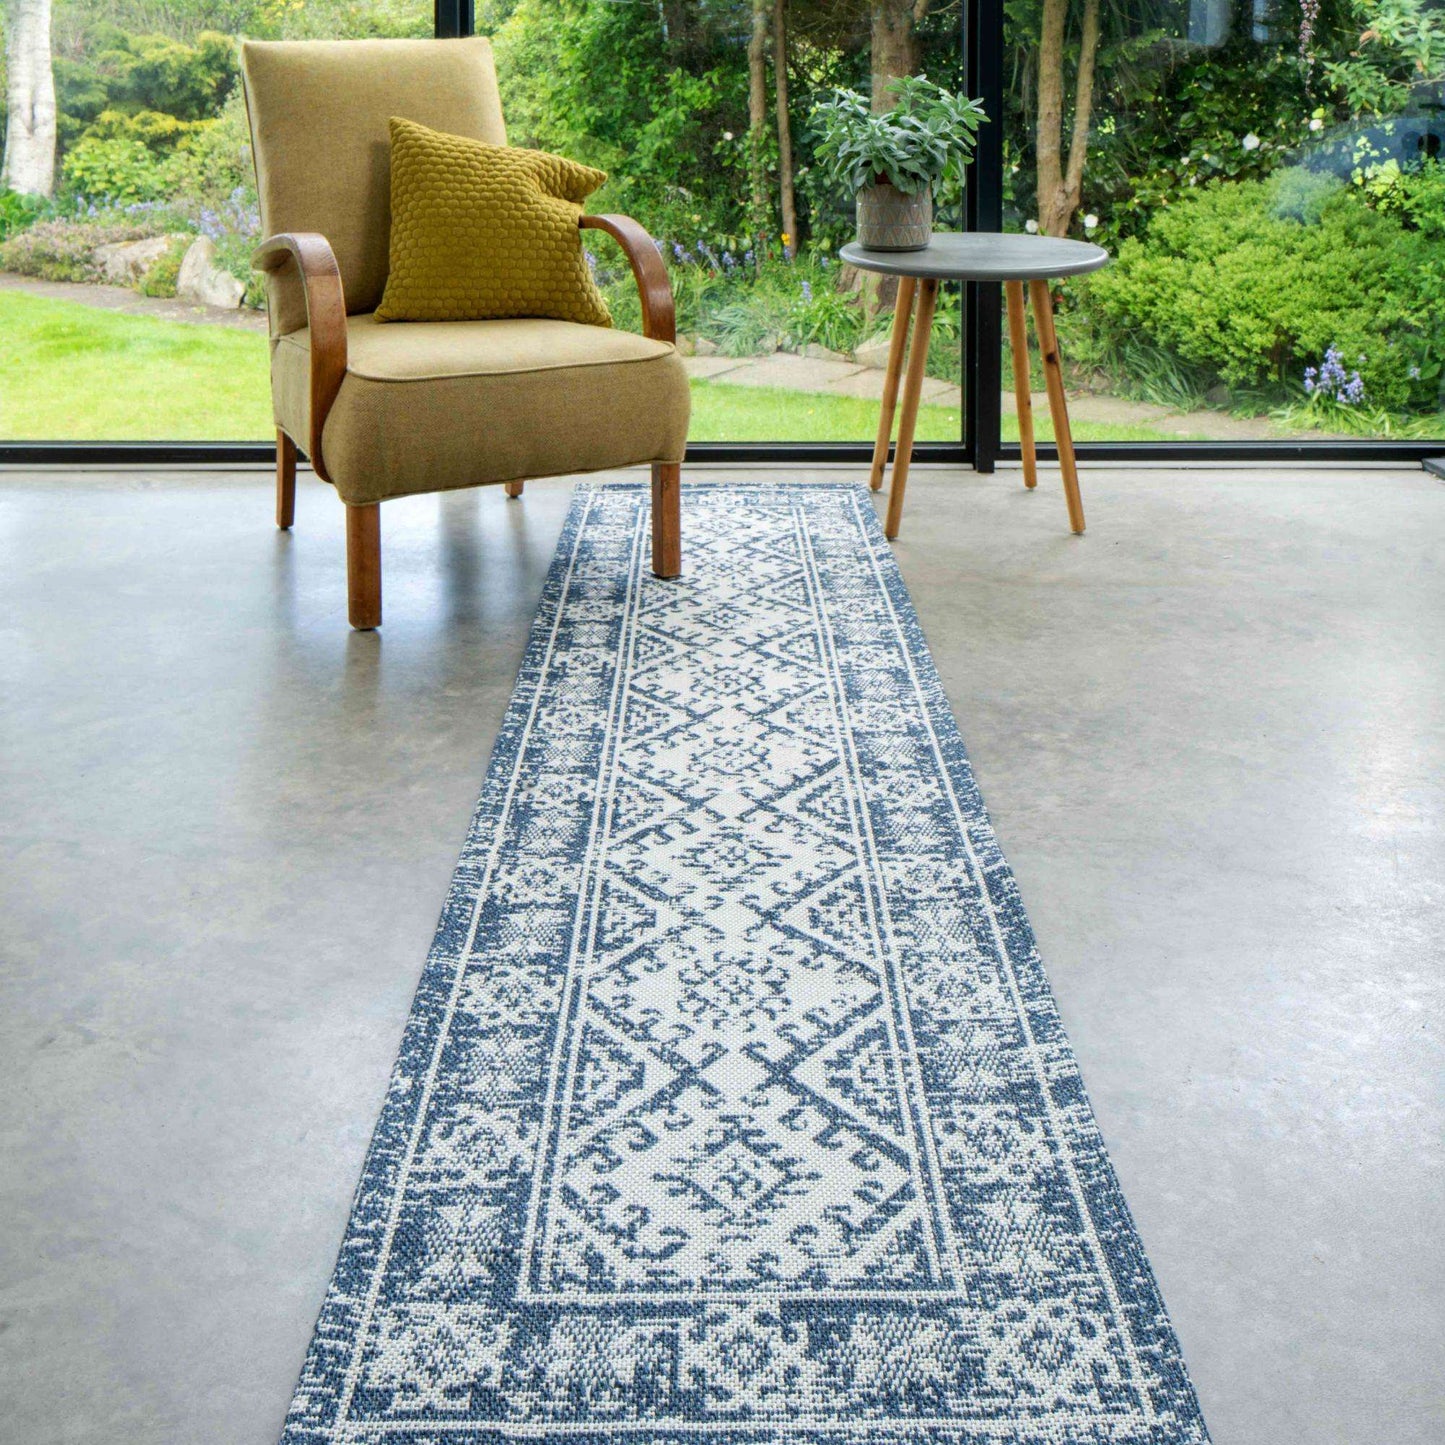 Distressed Vintage Blue Woven Sustainable Cotton Runner Rug